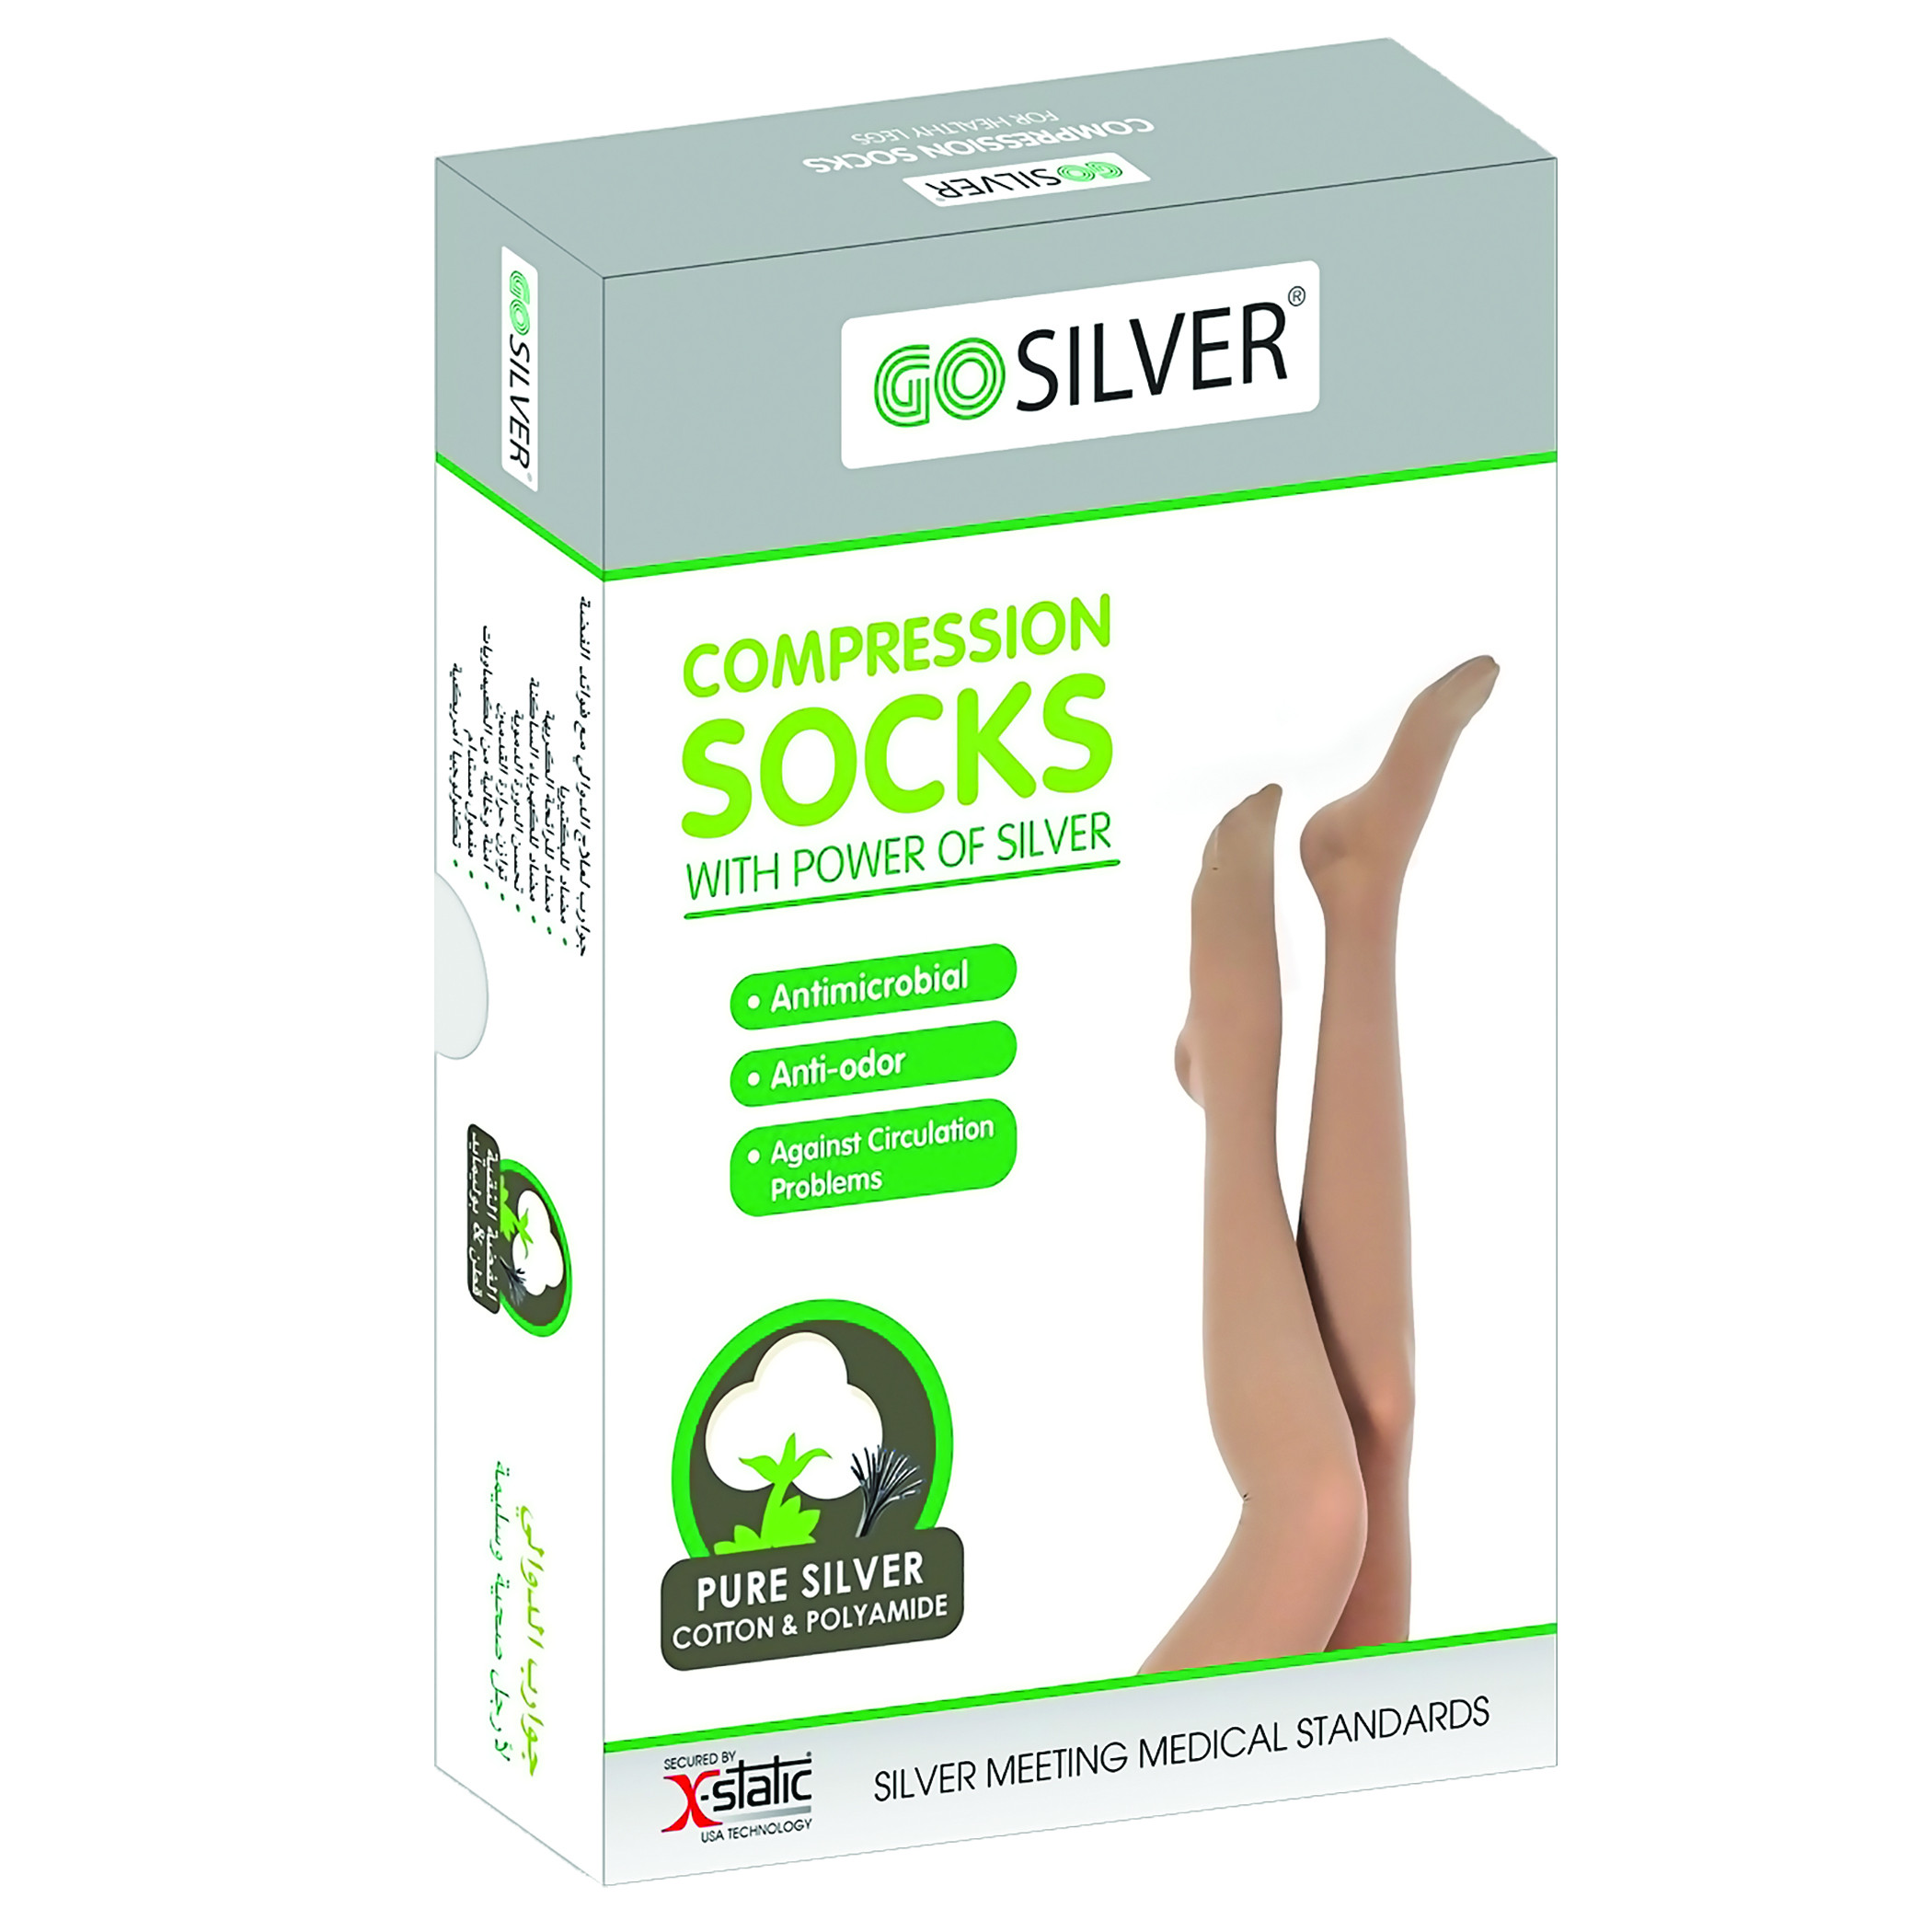 Go Silver Over Knee High Compression Socks, Class 2 (23-32 Mmhg) Open Toe With Silicon Flesh  Size 4